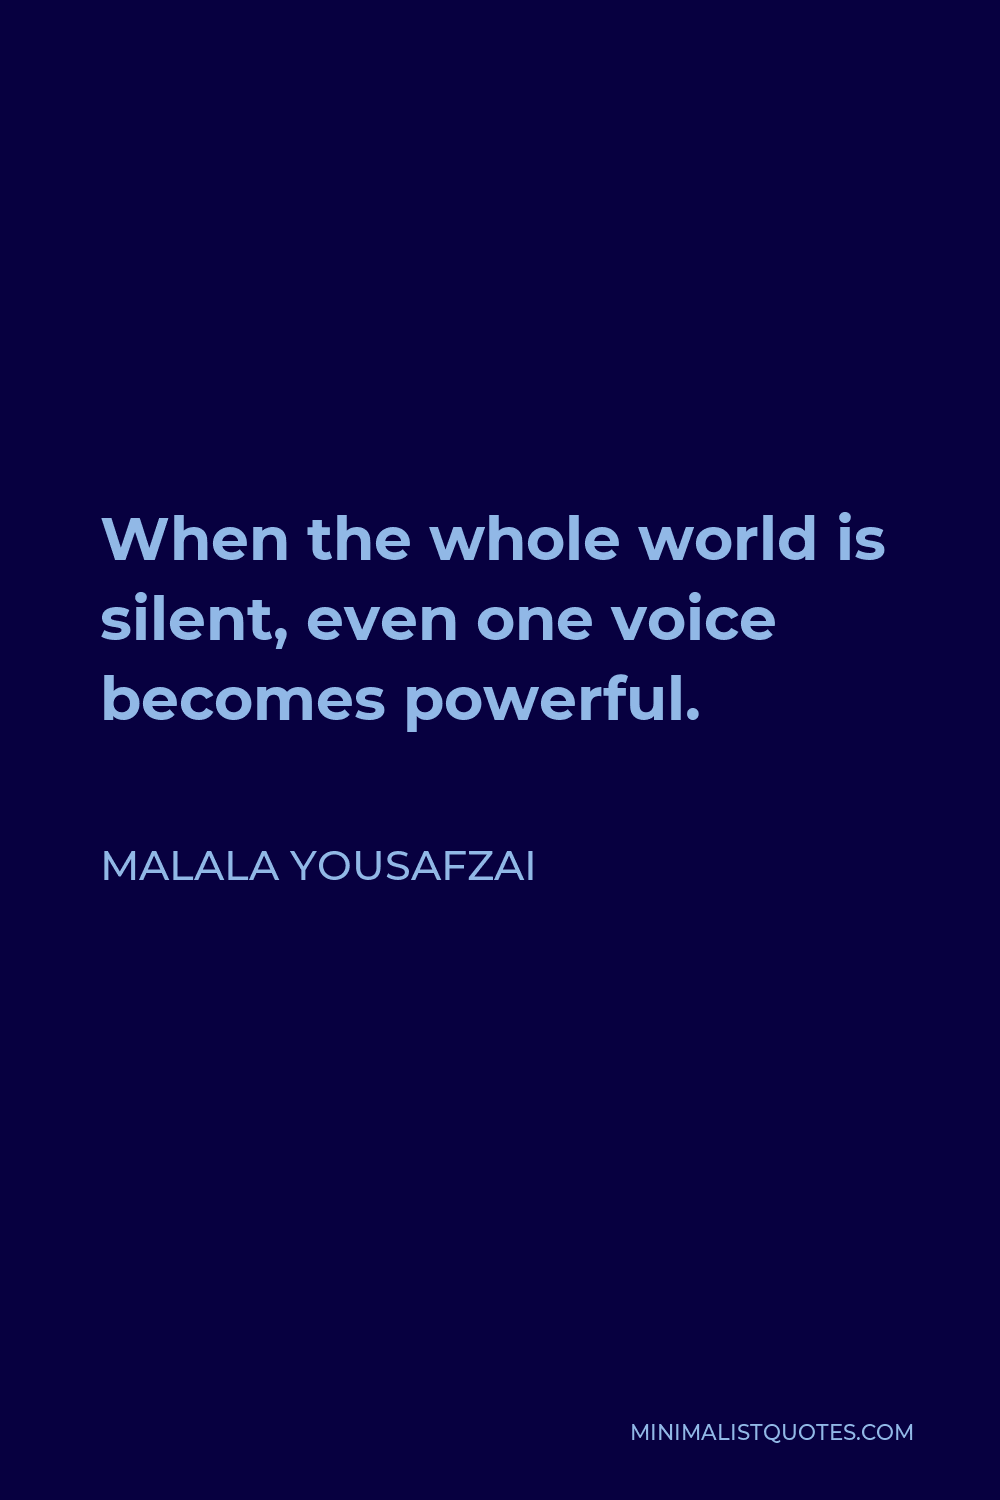 Malala Yousafzai Quote - When the whole world is silent, even one voice becomes powerful.